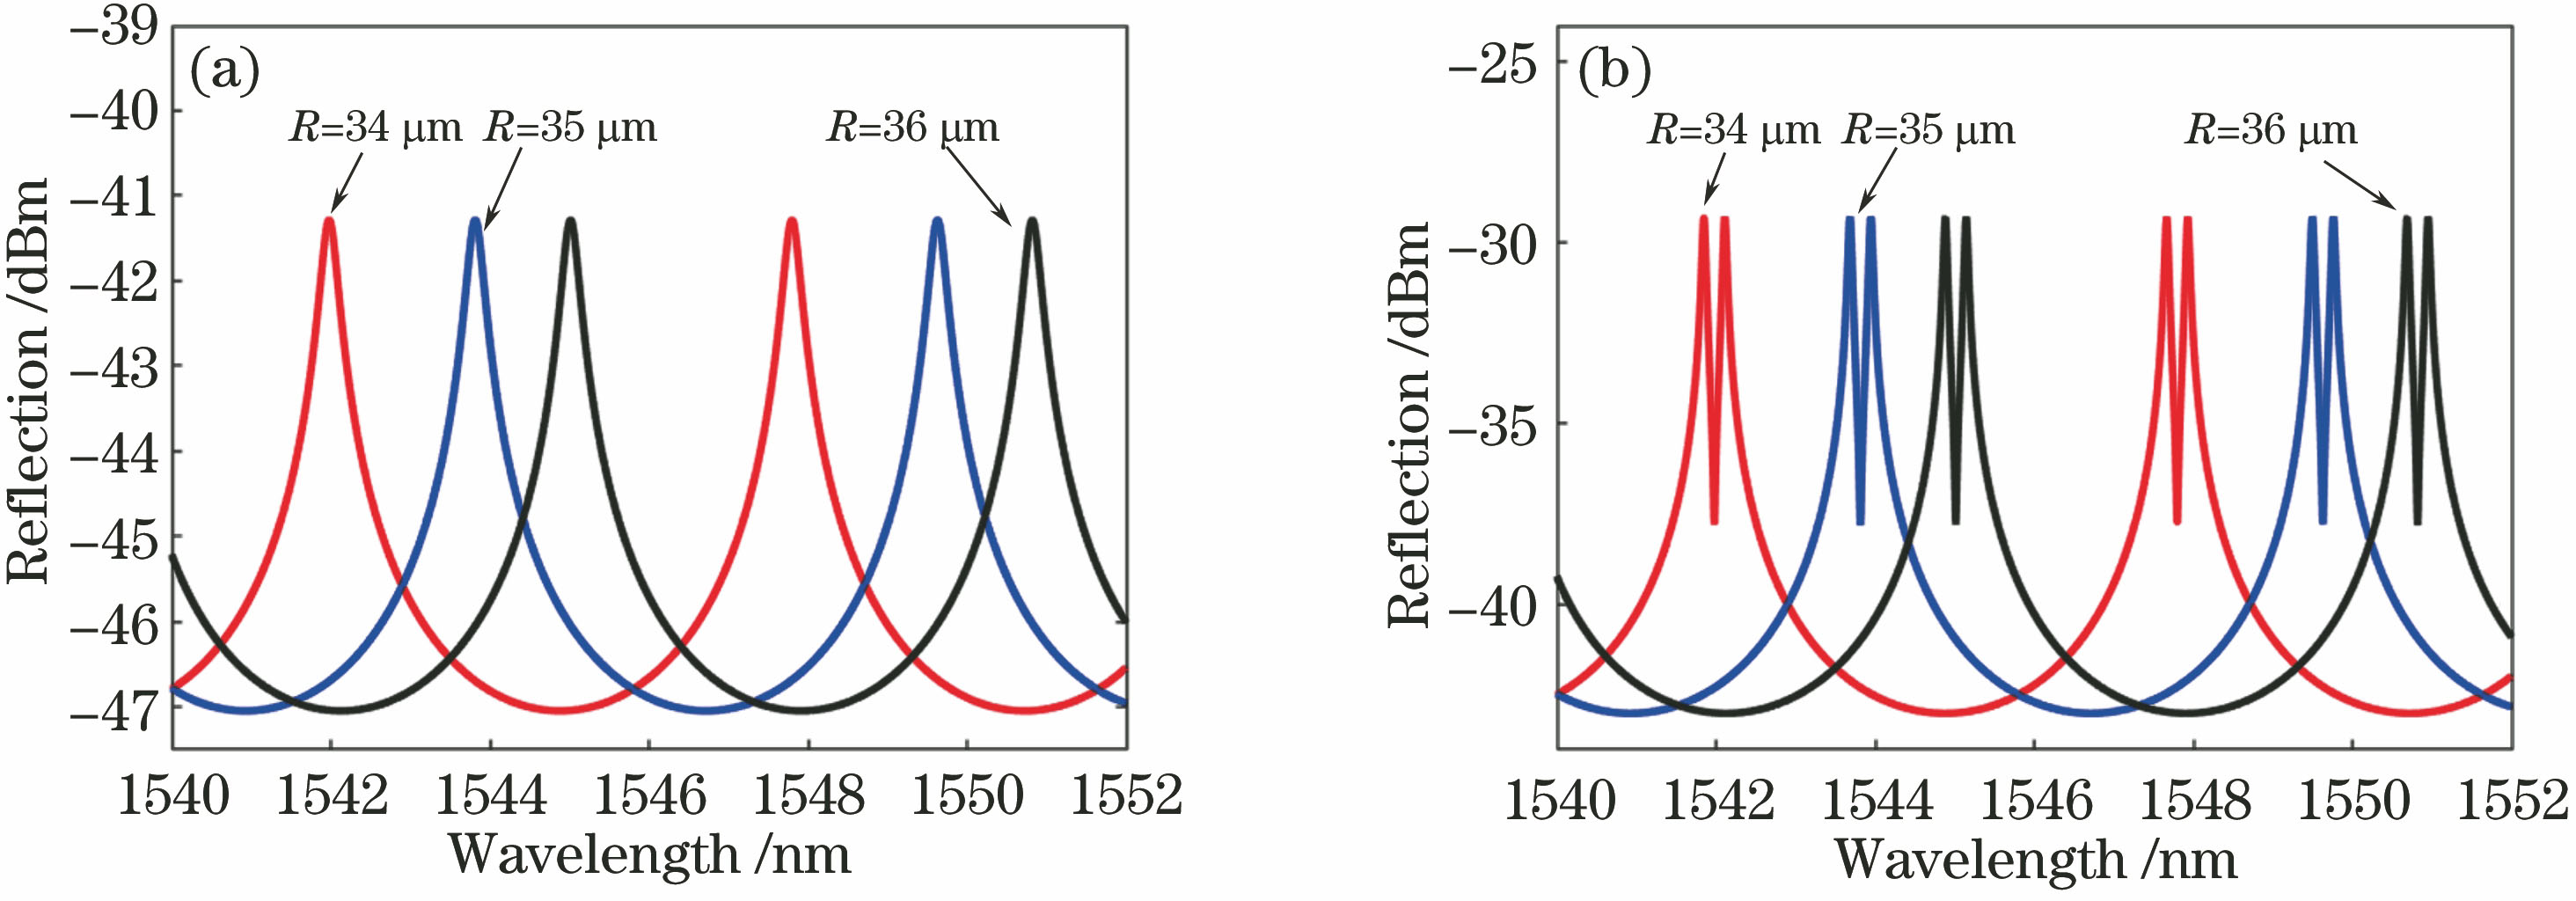 Simulated reflectance spectra of single microsphere coupled resonator and double microsphere coupled resonators. (a) Single microsphere coupled resonator; (b) double microsphere coupled resonators